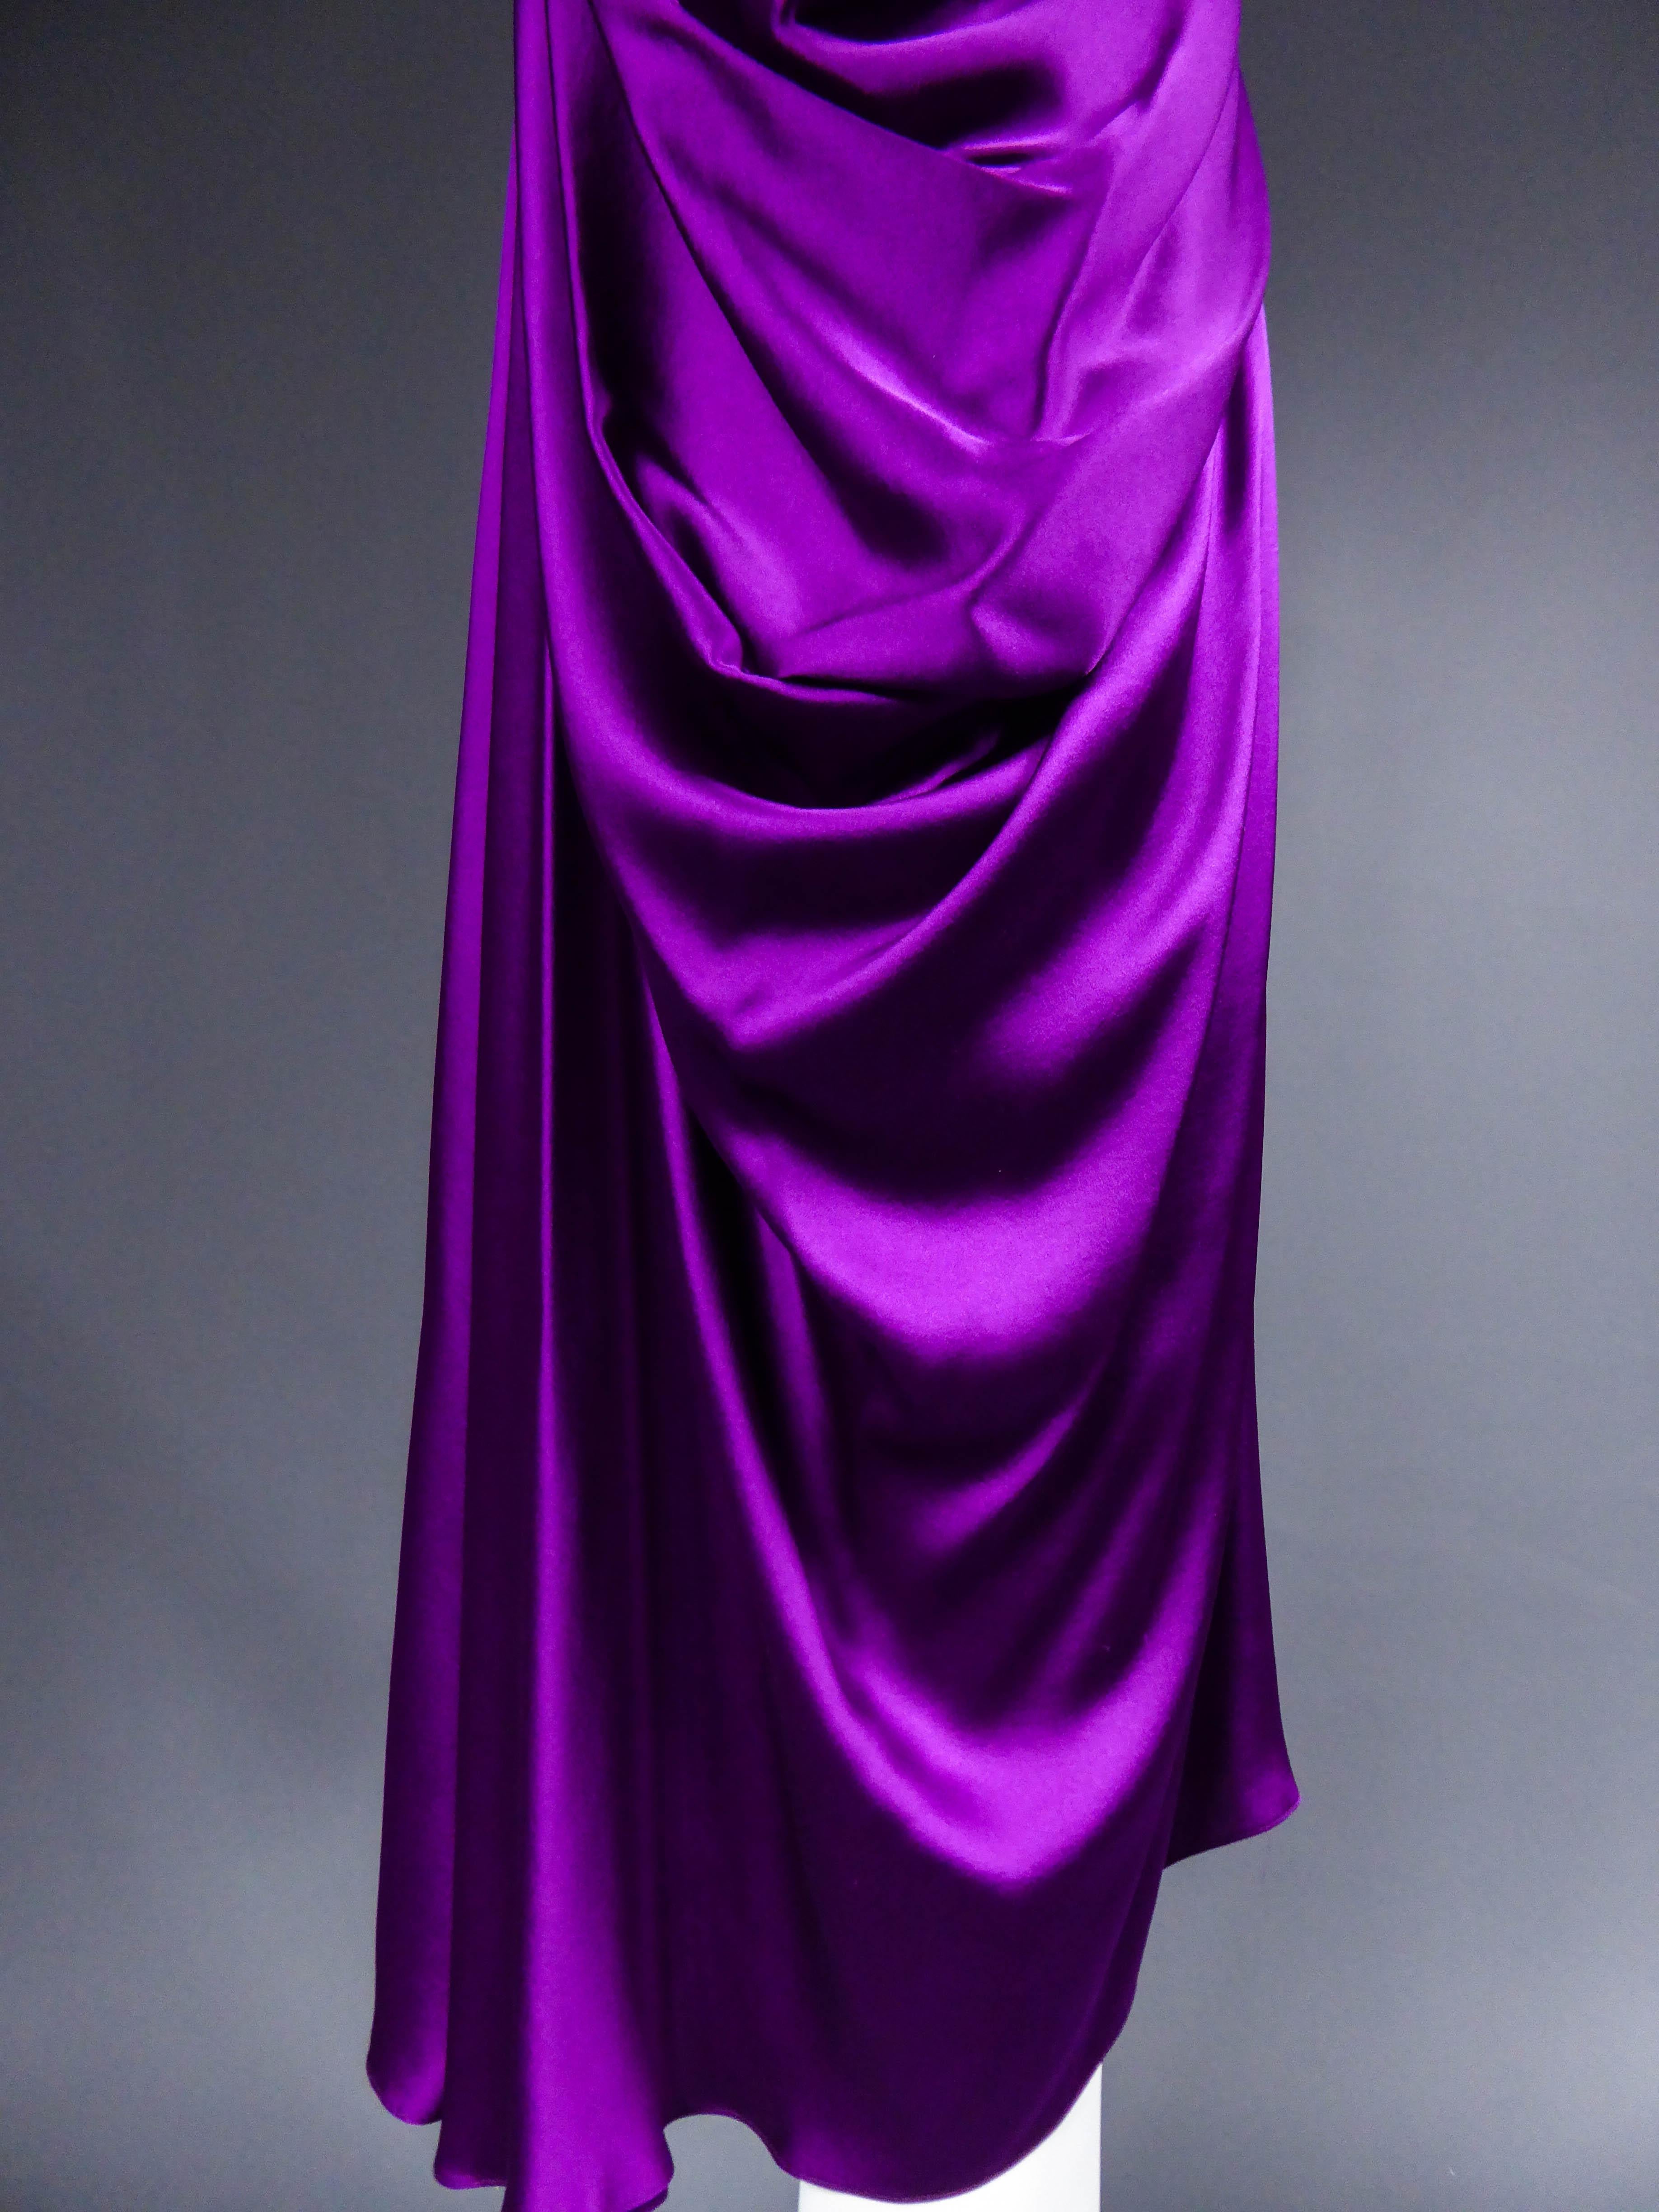 Yves Saint Laurent Satin Dress by Stefano Pilati, 2008 Collection  In Good Condition For Sale In Toulon, FR